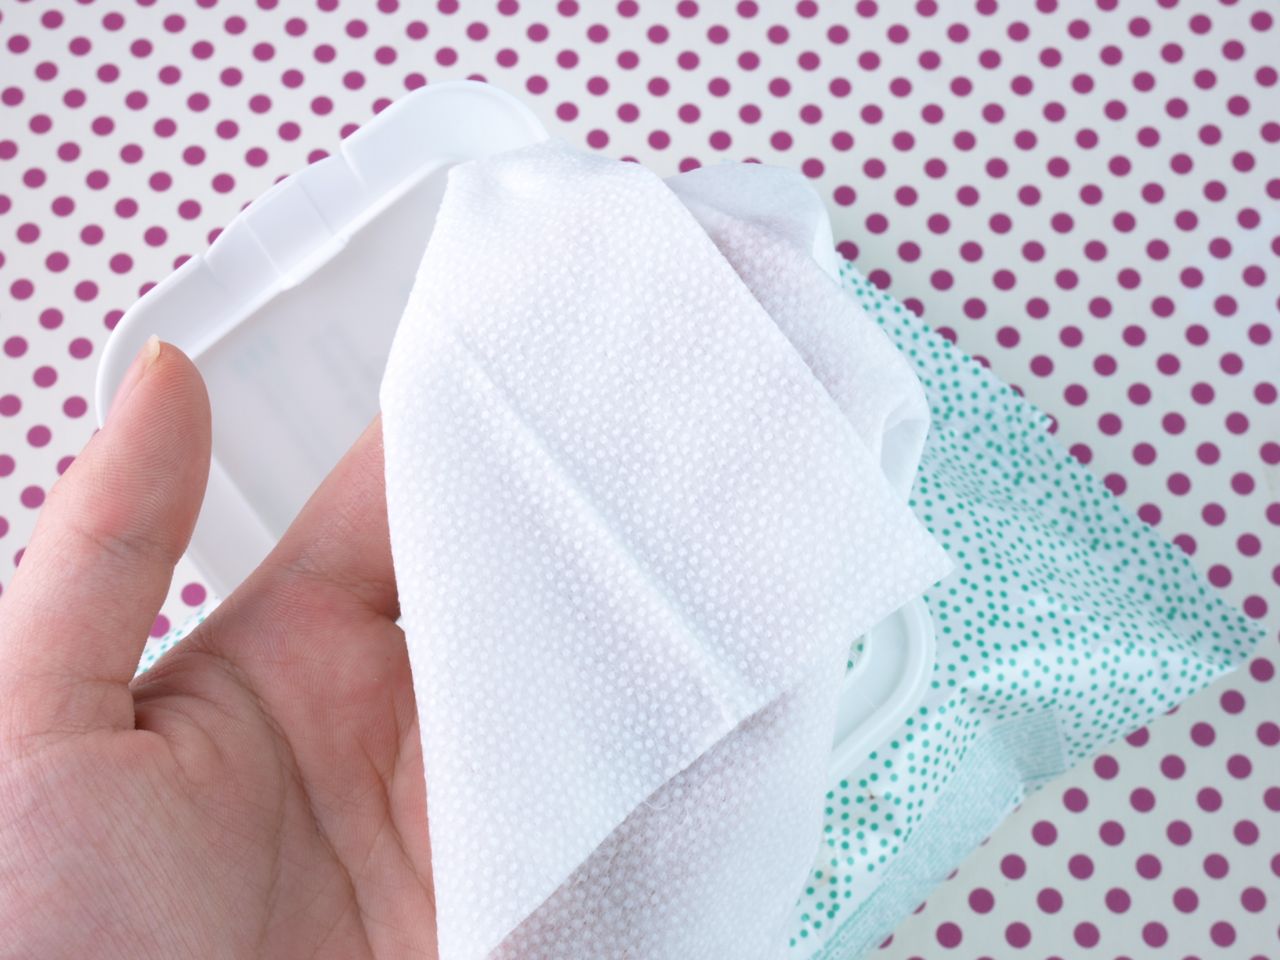 Sephora Express Cleansing & Exfoliating Wipes: Review